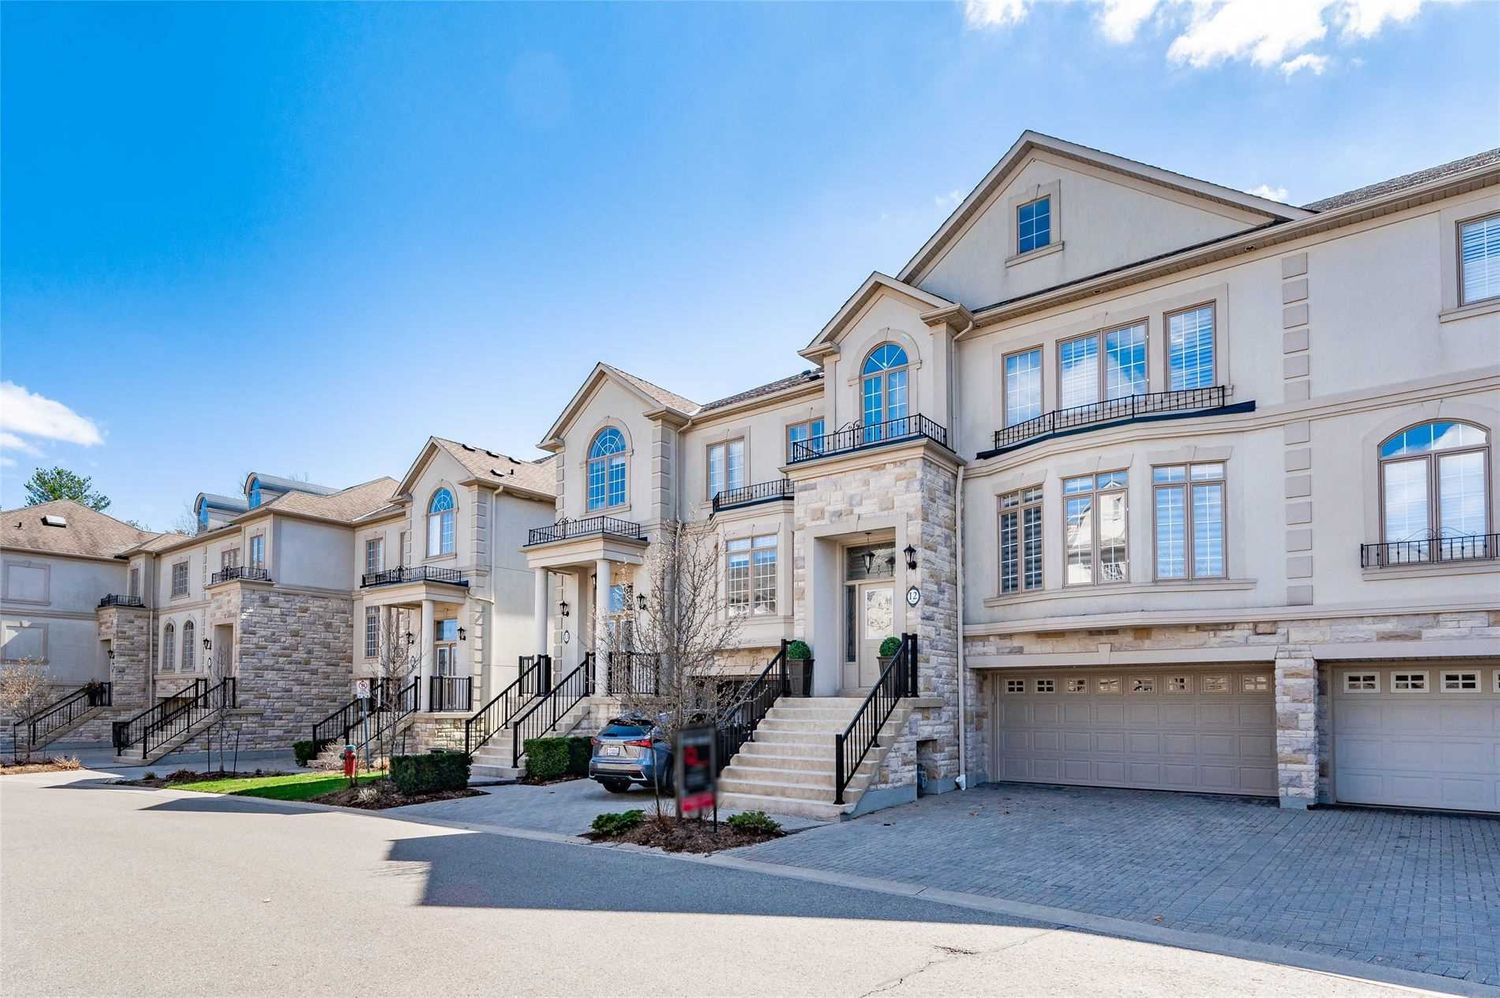 2400 Neyagawa Boulevard. Winding Creek Cove Townhomes is located in  Oakville, Toronto - image #1 of 2